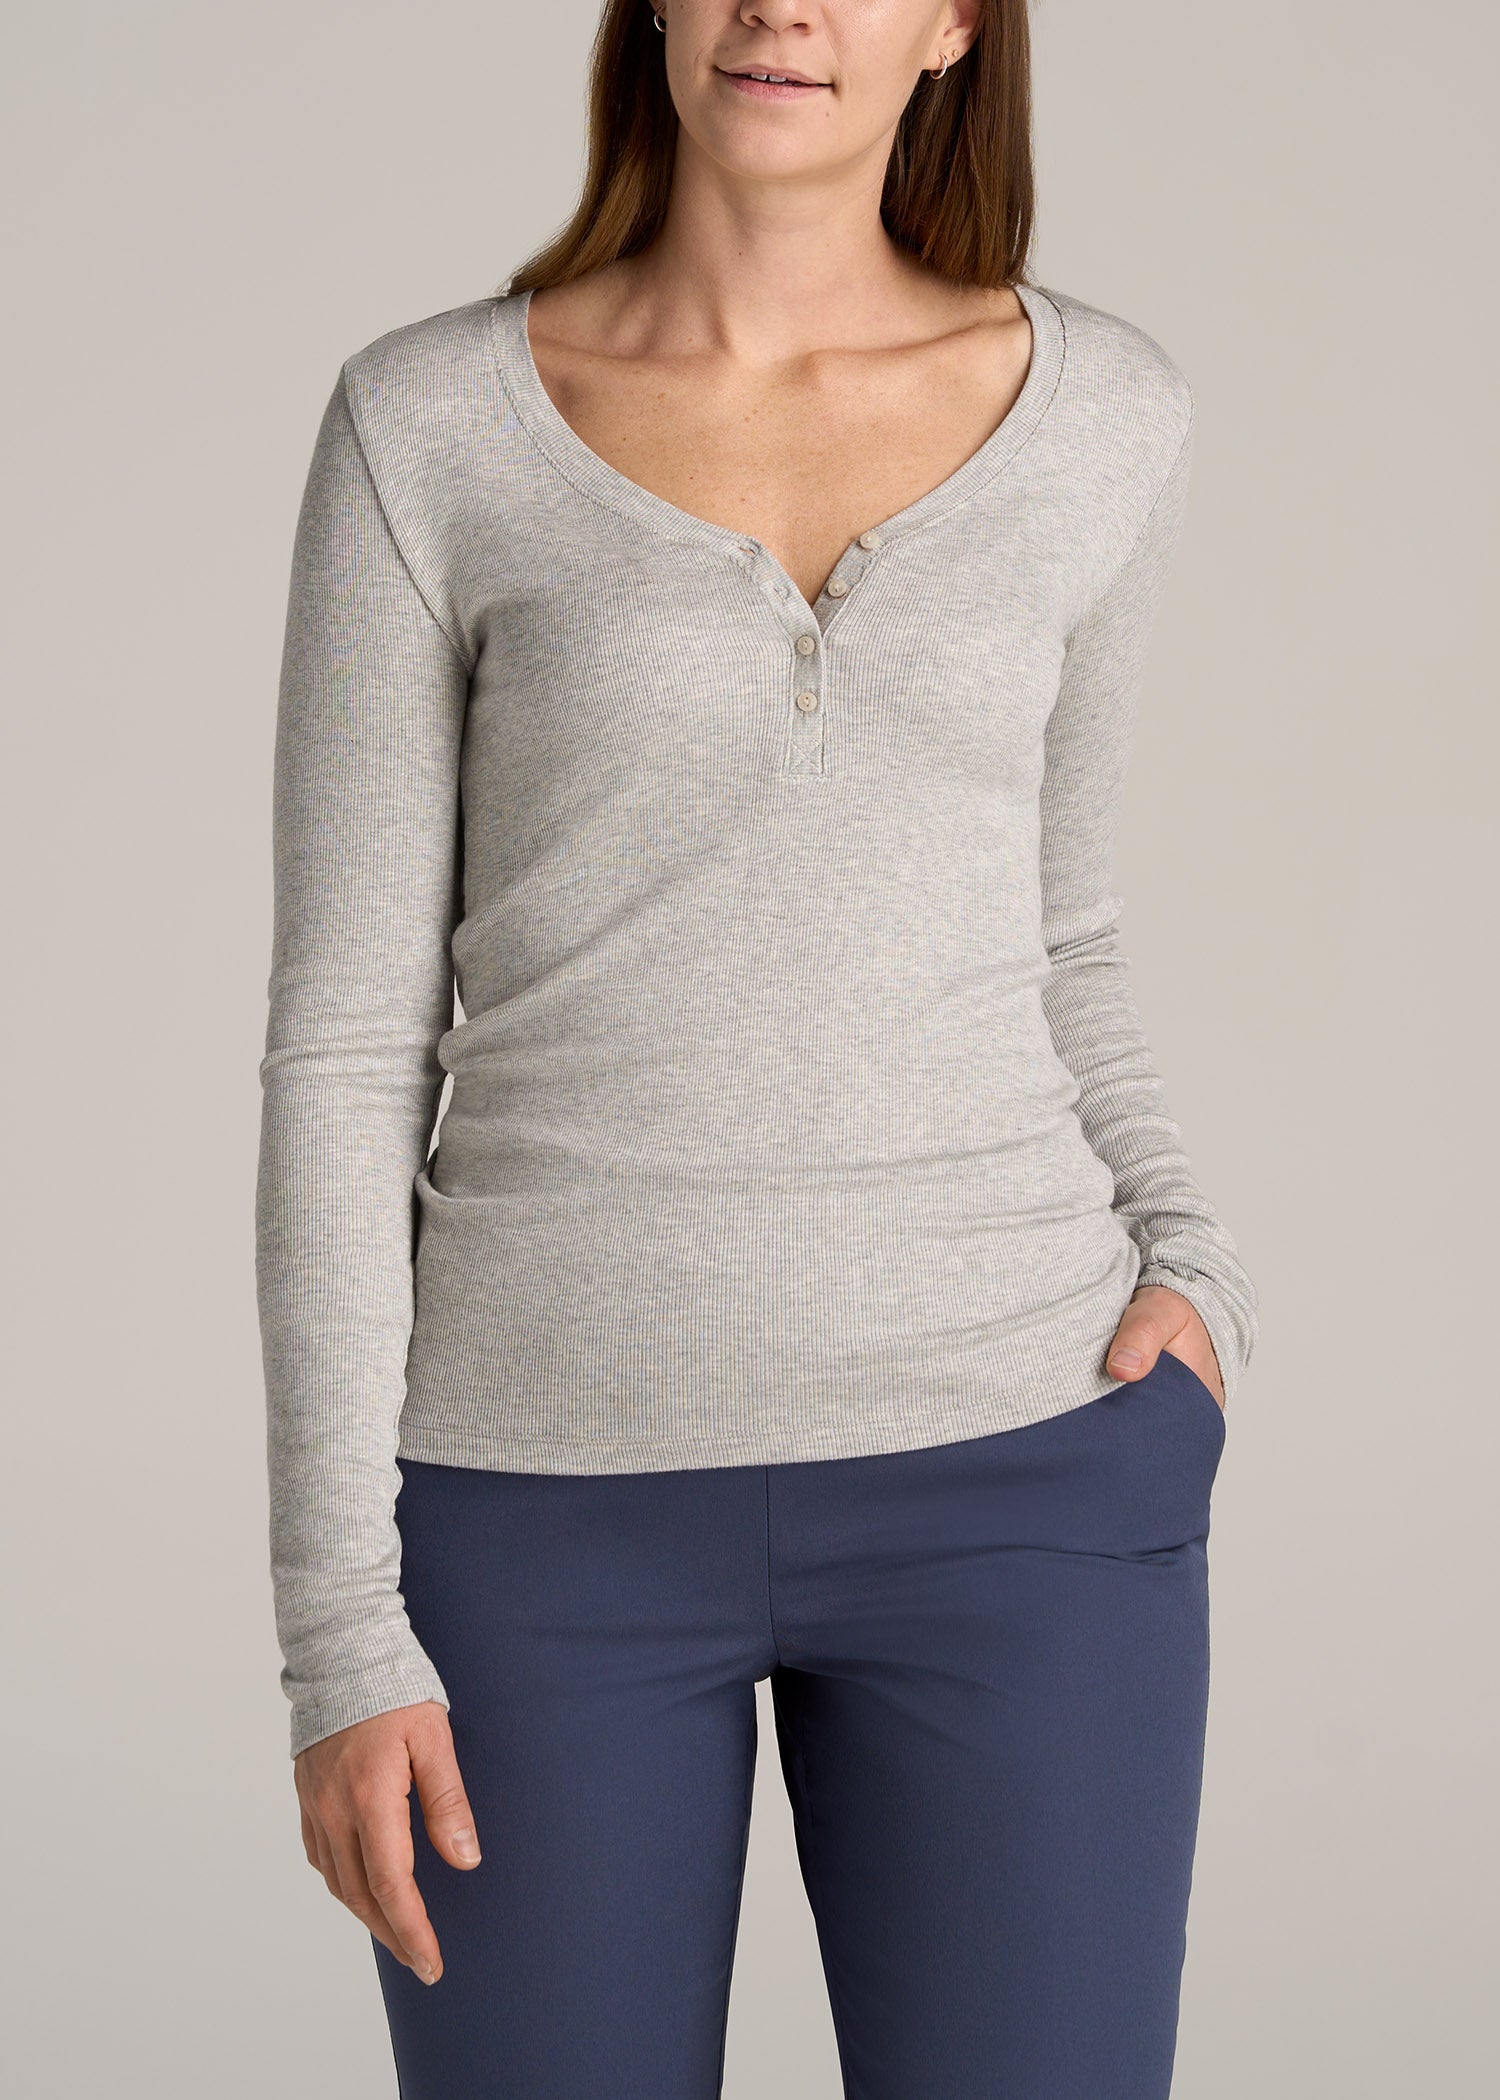 Ribbed Henley Long Sleeve Top